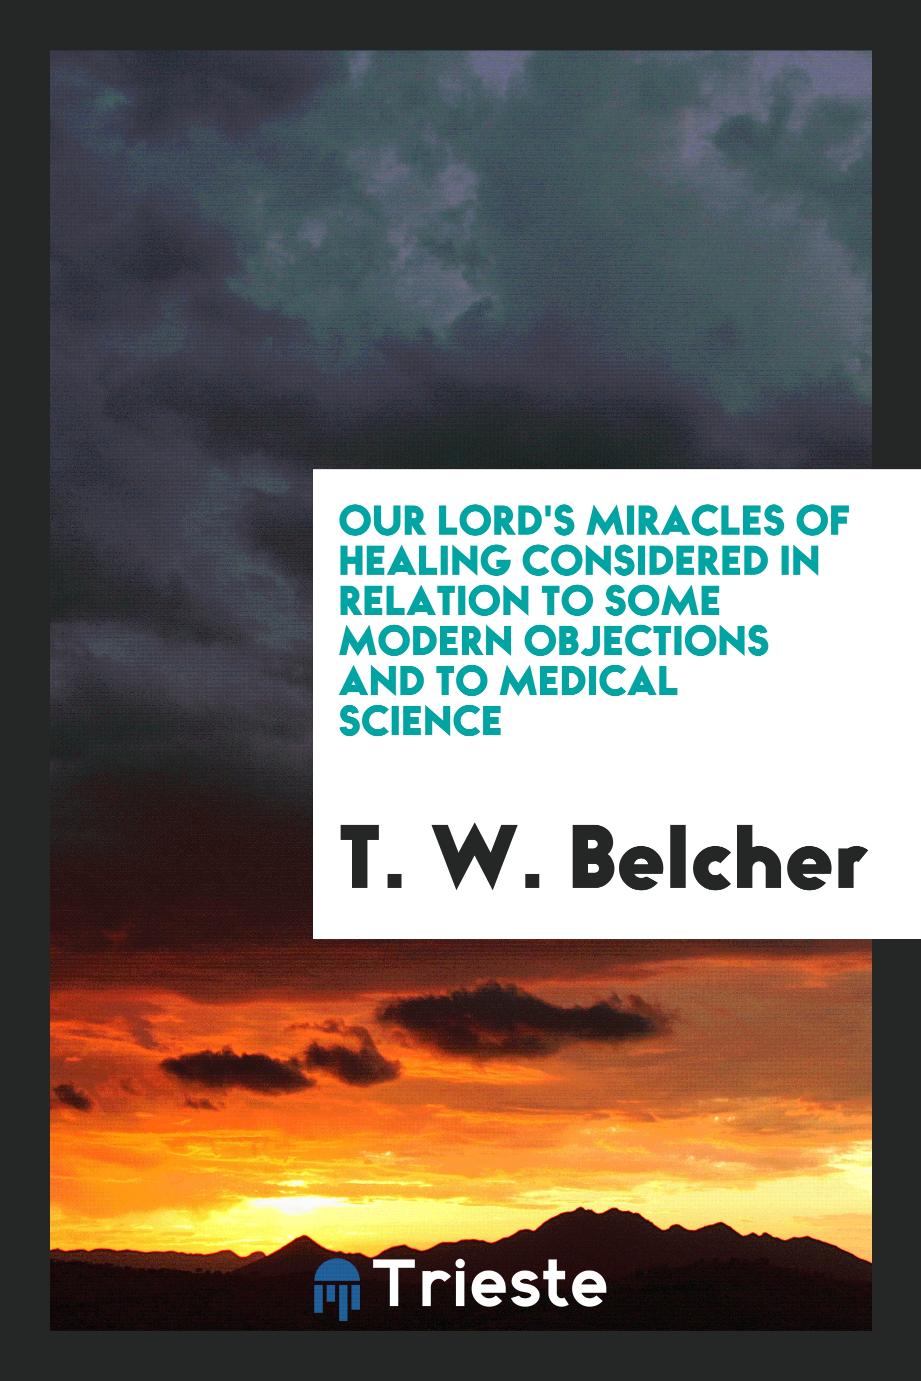 Our Lord's Miracles of Healing Considered in Relation to Some Modern Objections and to Medical Science